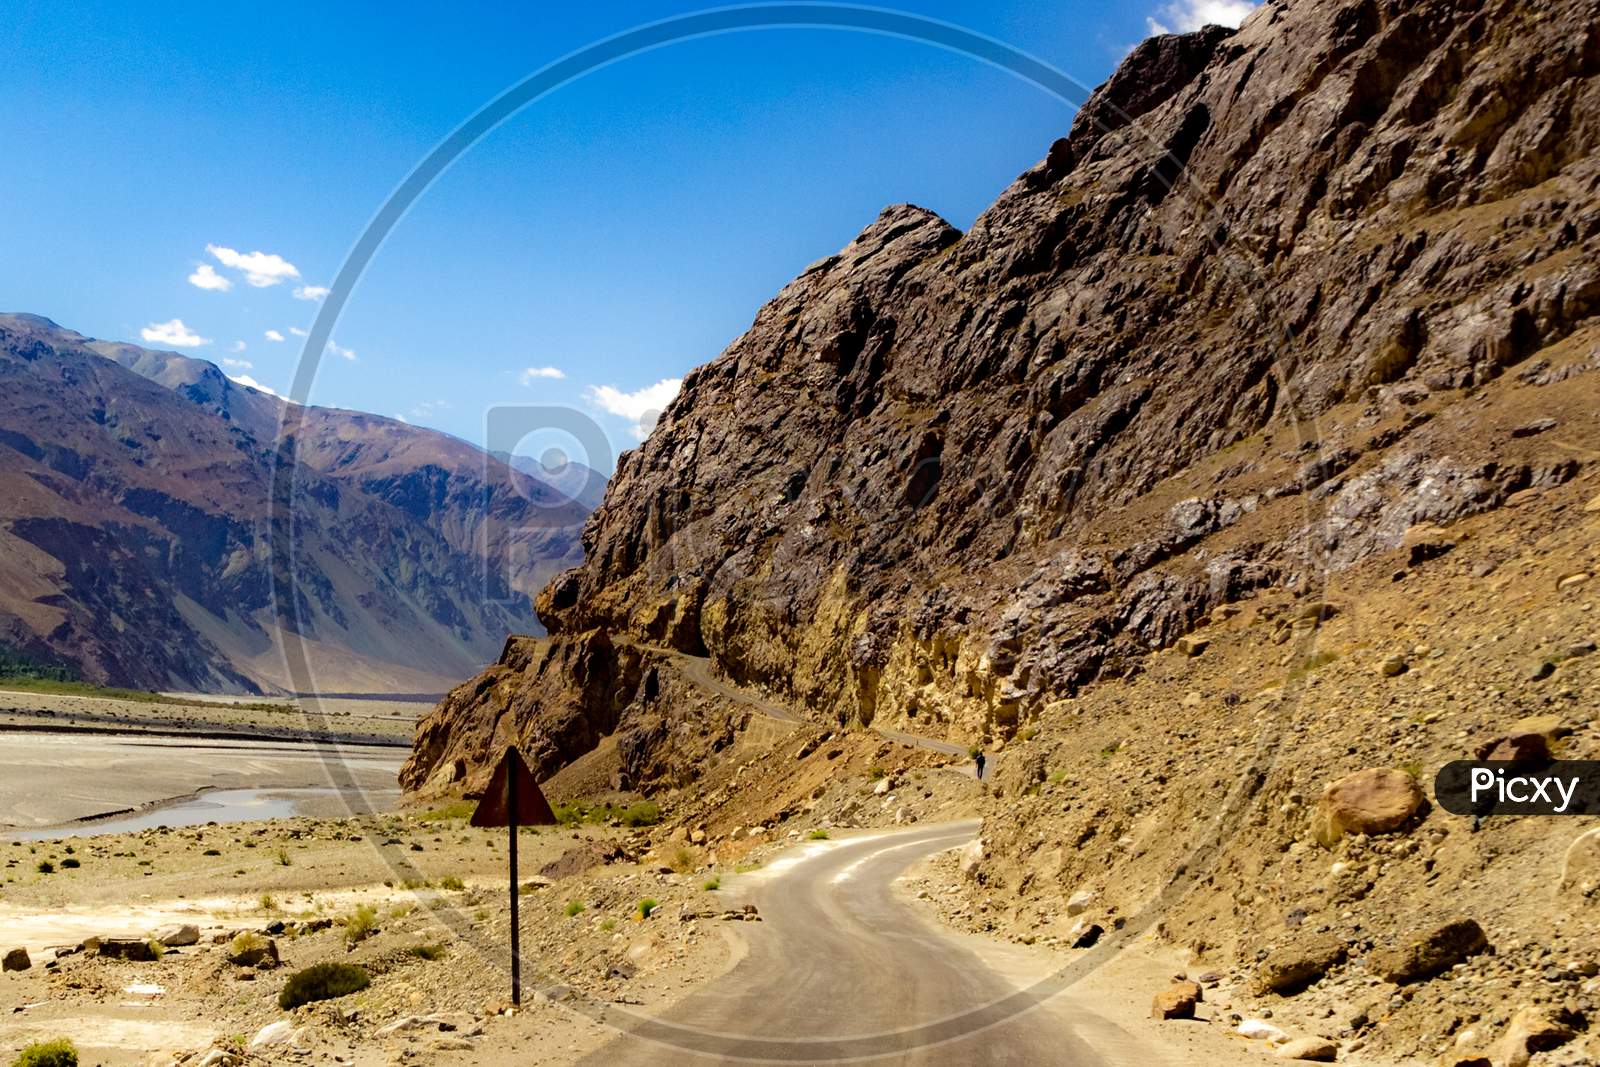 Curved Hilly Highway In Between Barren Himalayan Mountains Of Leh Ladakh, Jammu And Kashmir, India